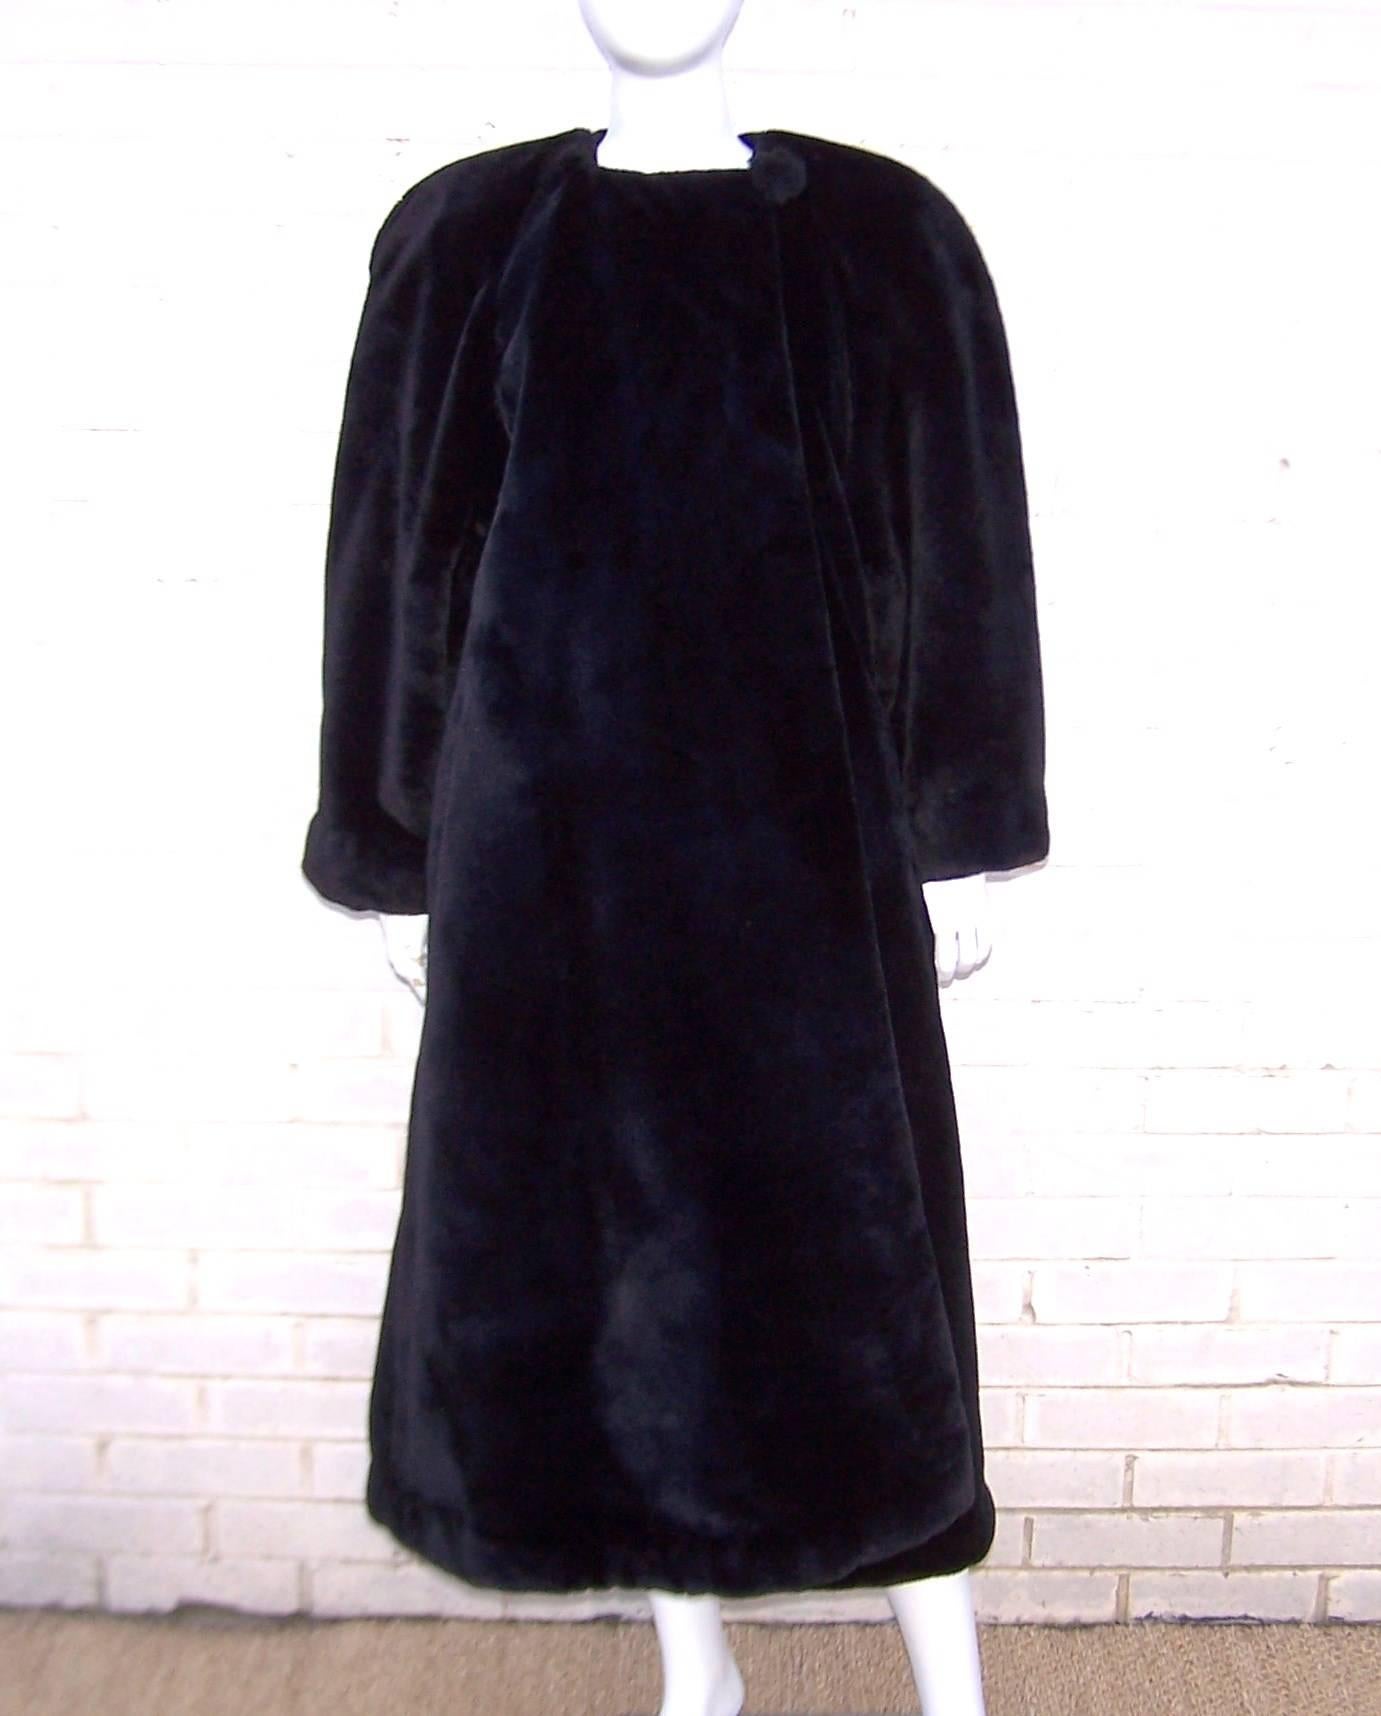 What a great bear hug of a coat!  From the late great Sonia Rykiel, this voluminous jet black faux fur coat has all the inspiration of a 1940's silhouette including broad shoulders and high drama. The coat buttons at the neck with a large faux fur